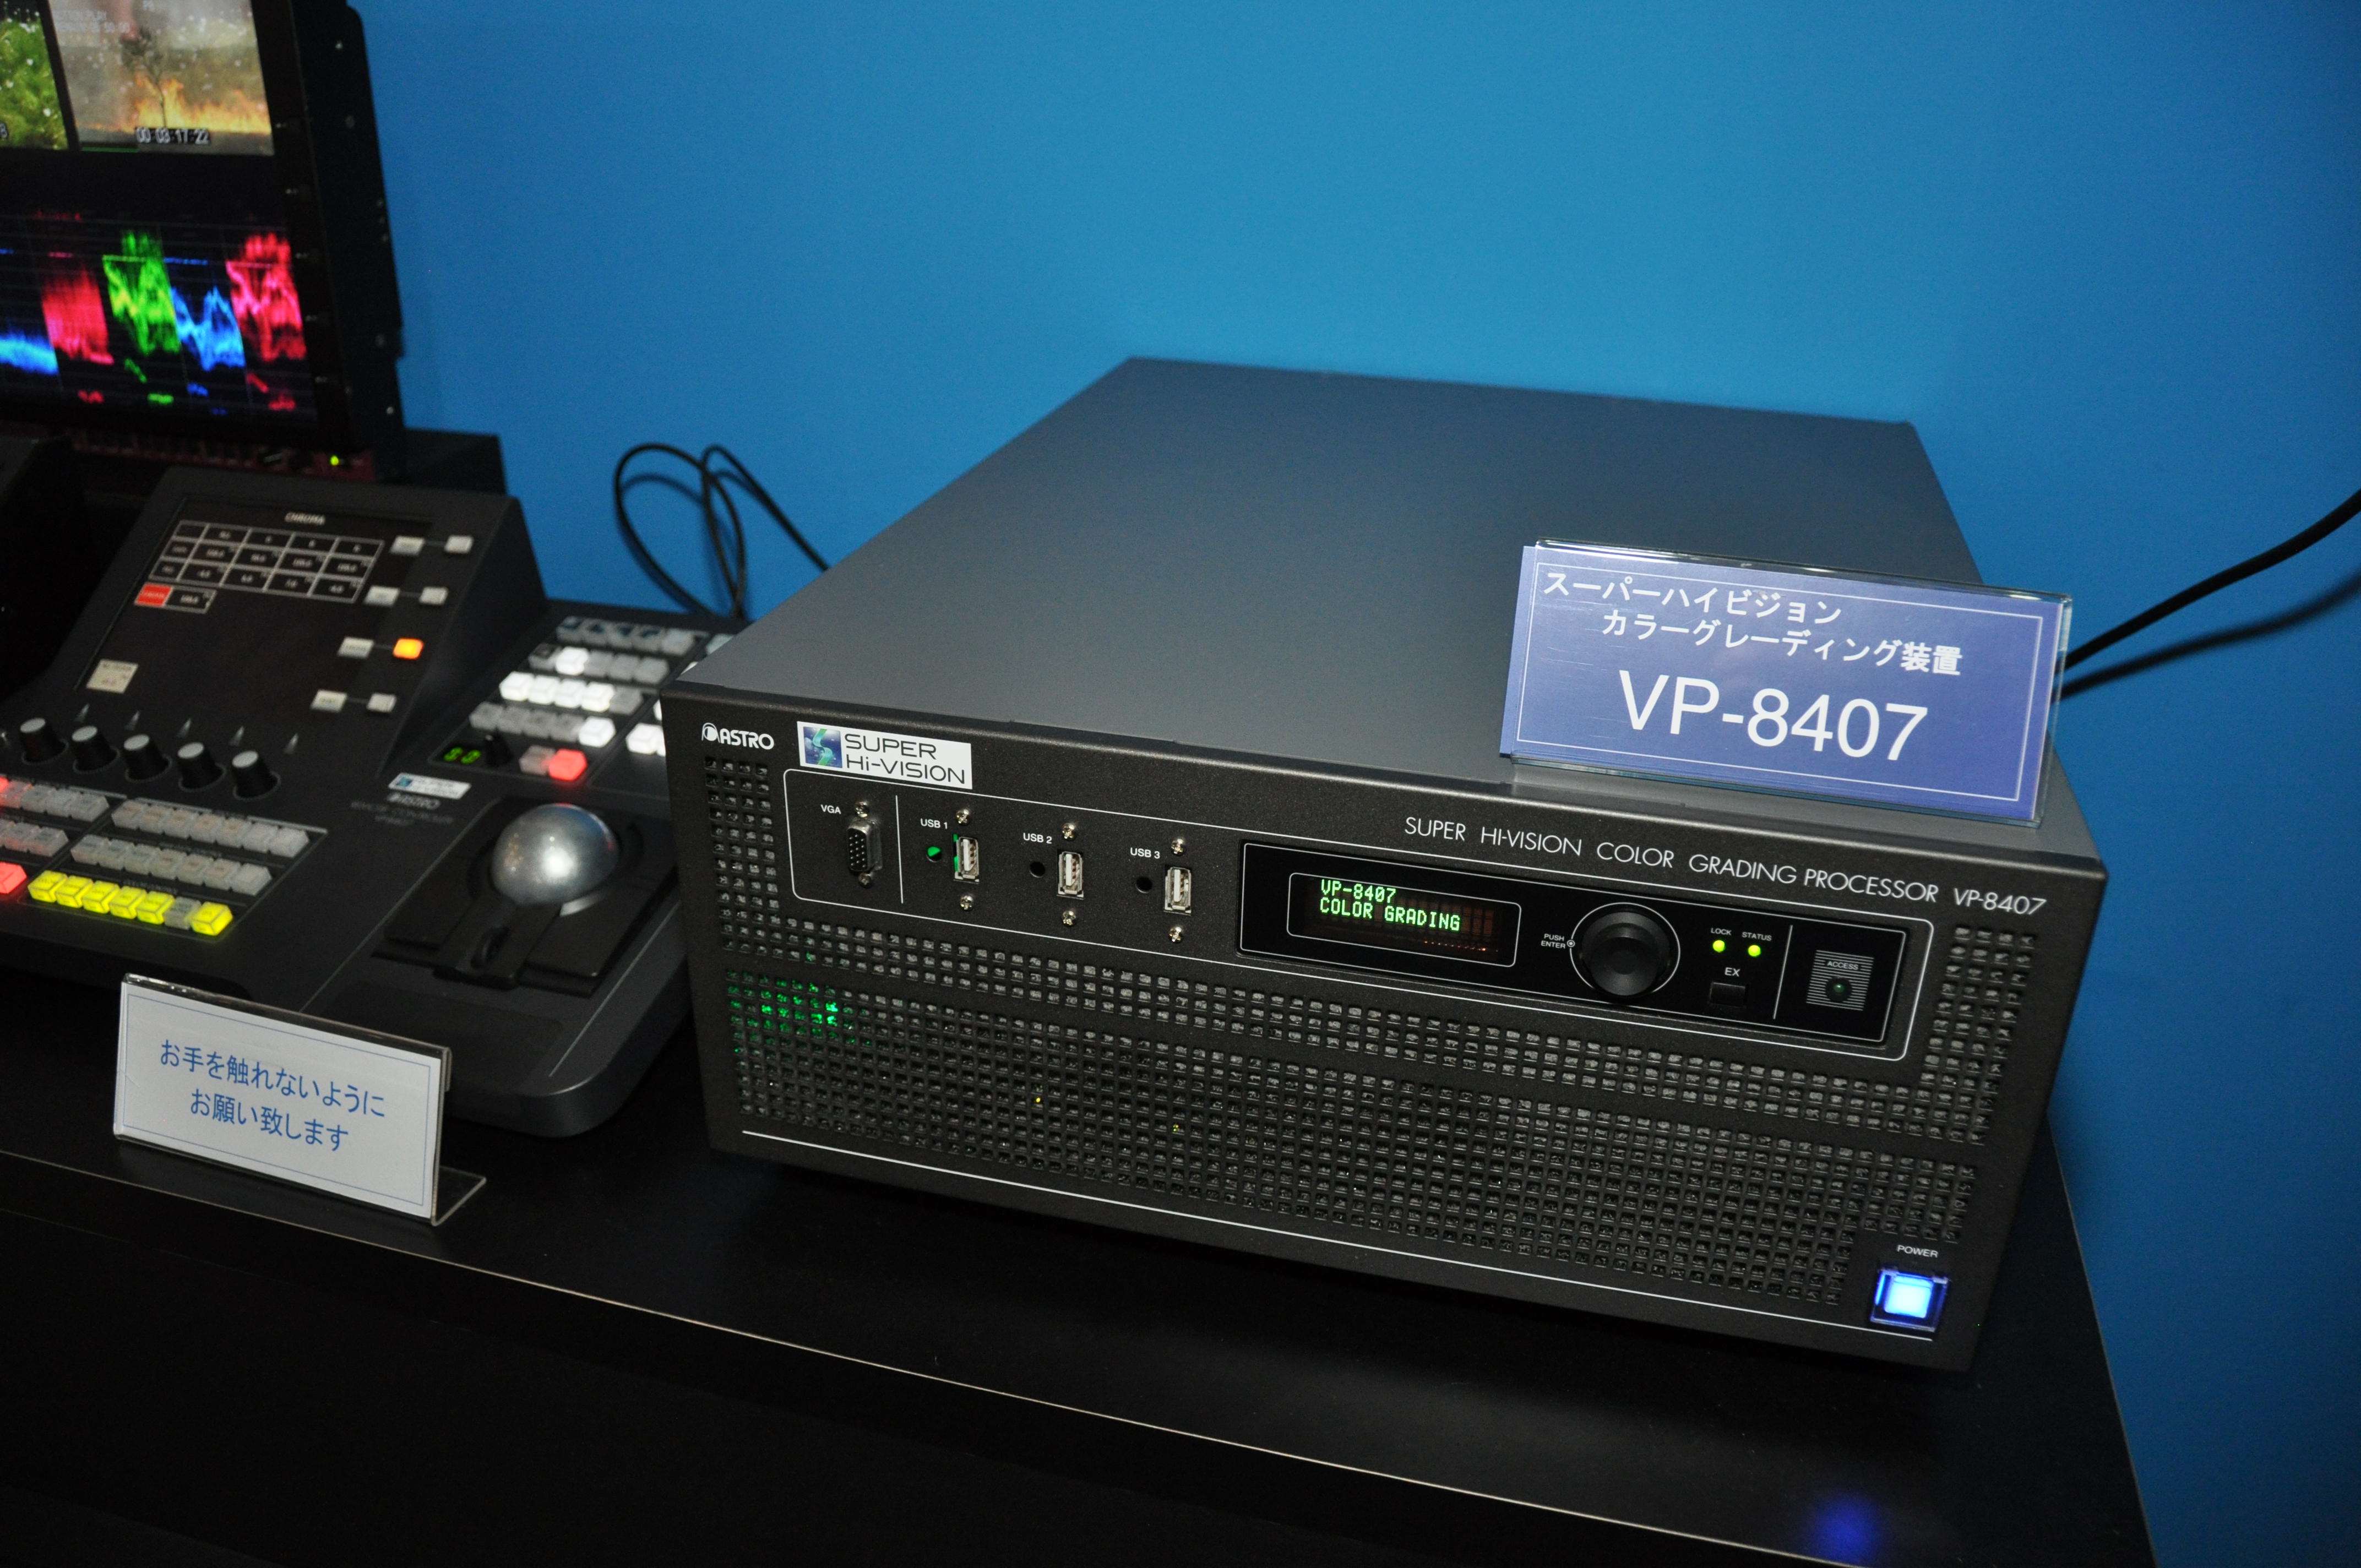 VP-84: Color Grading Equipment Enables A Range of Real-time Correction Capabilities